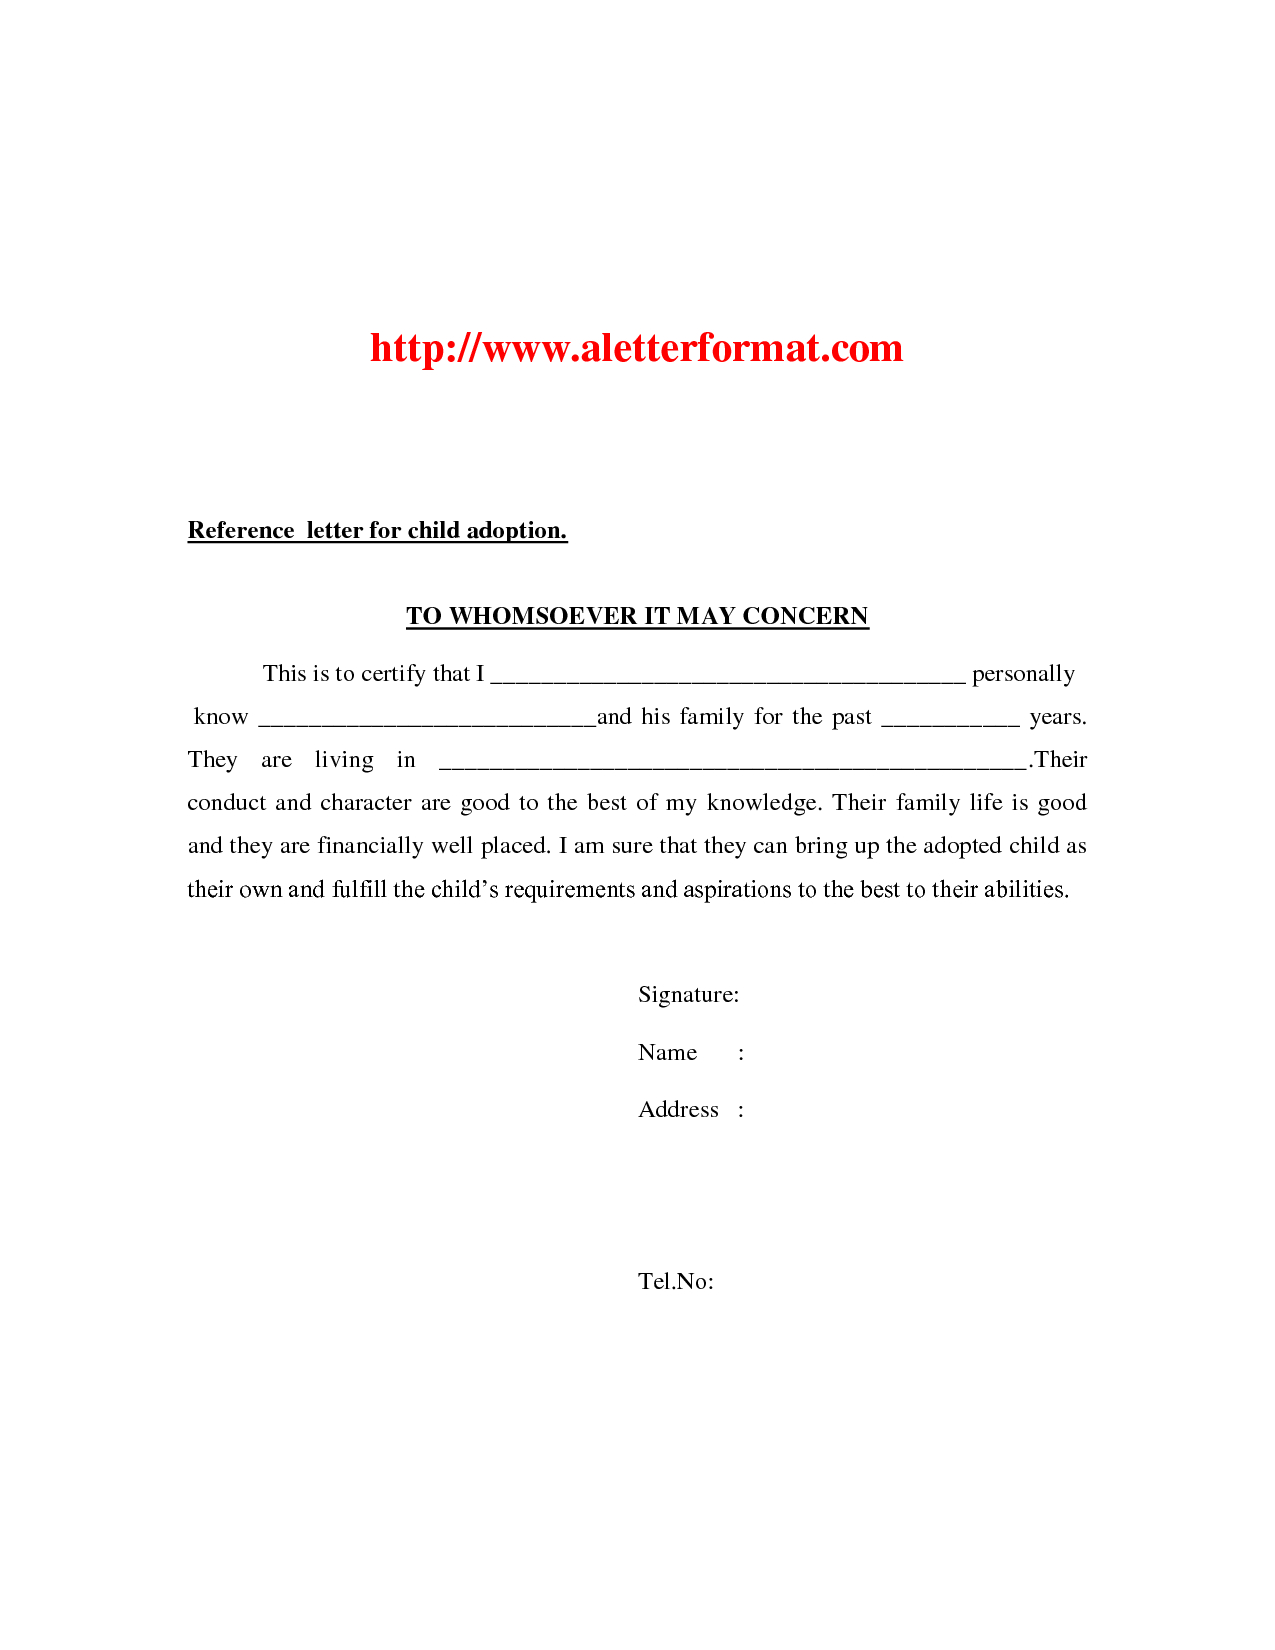 Adoption Reference Letter Template - Adoption Reference Letter Gallery Letter format formal Sample